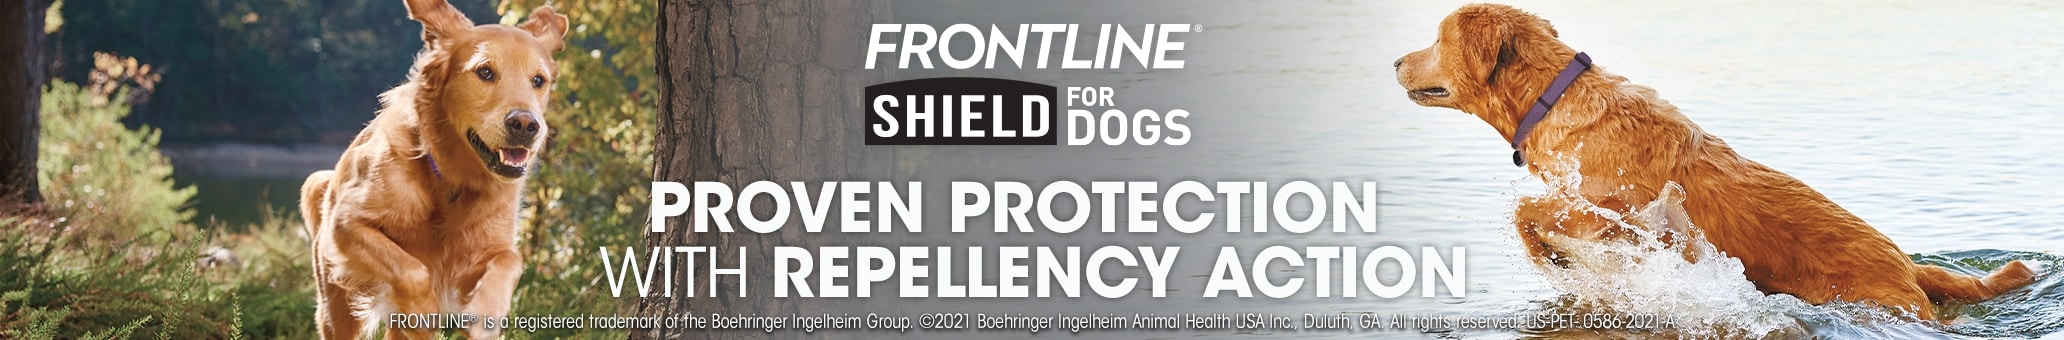 Frontline Shield Brand Banner. Proven Protection With Repellency Action.